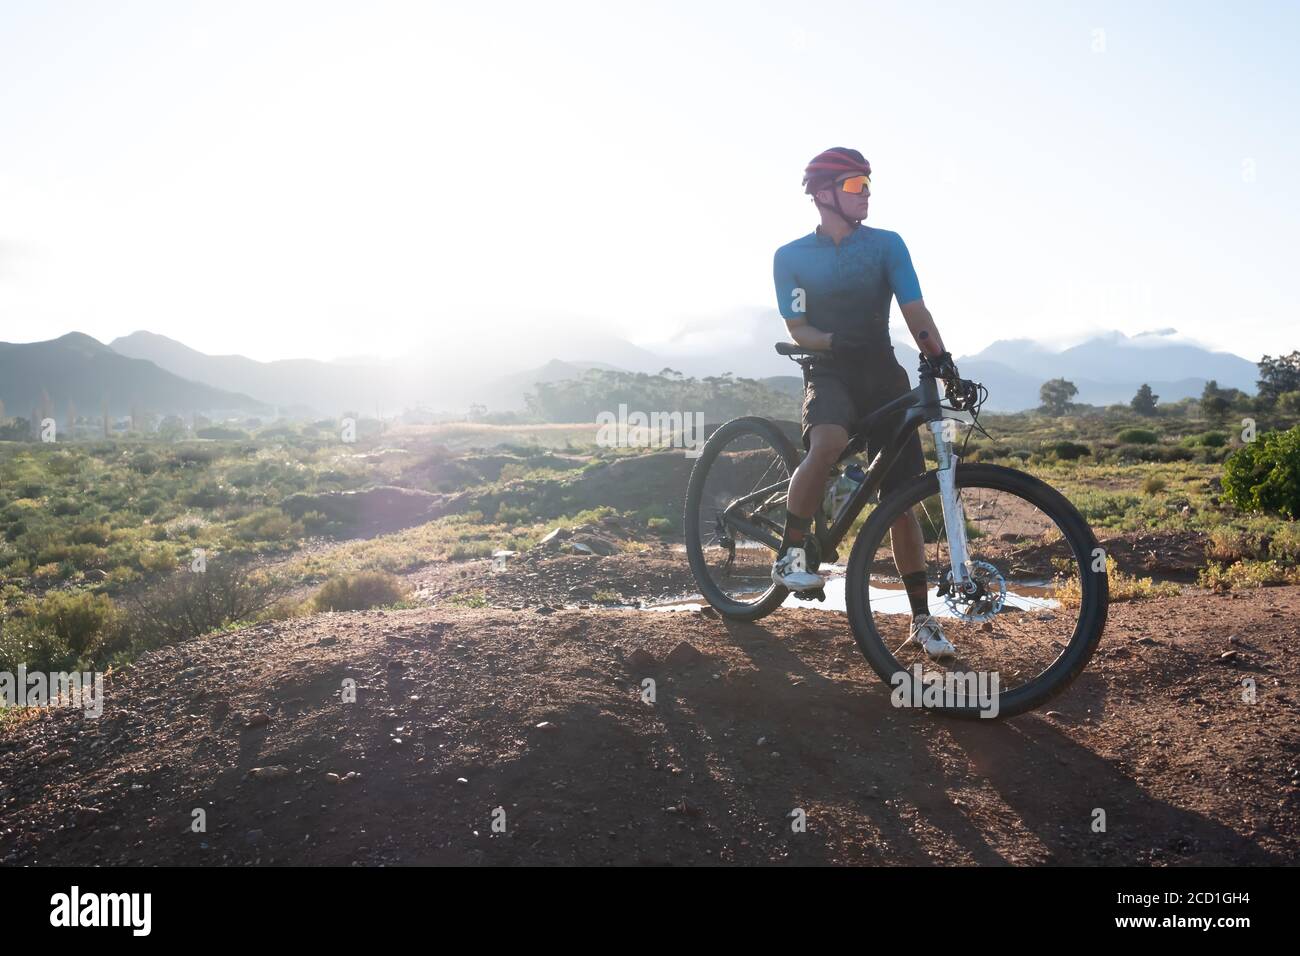 backlit image of a mountain biker and his bike on top of a mound with a mountain range in the distance Stock Photo